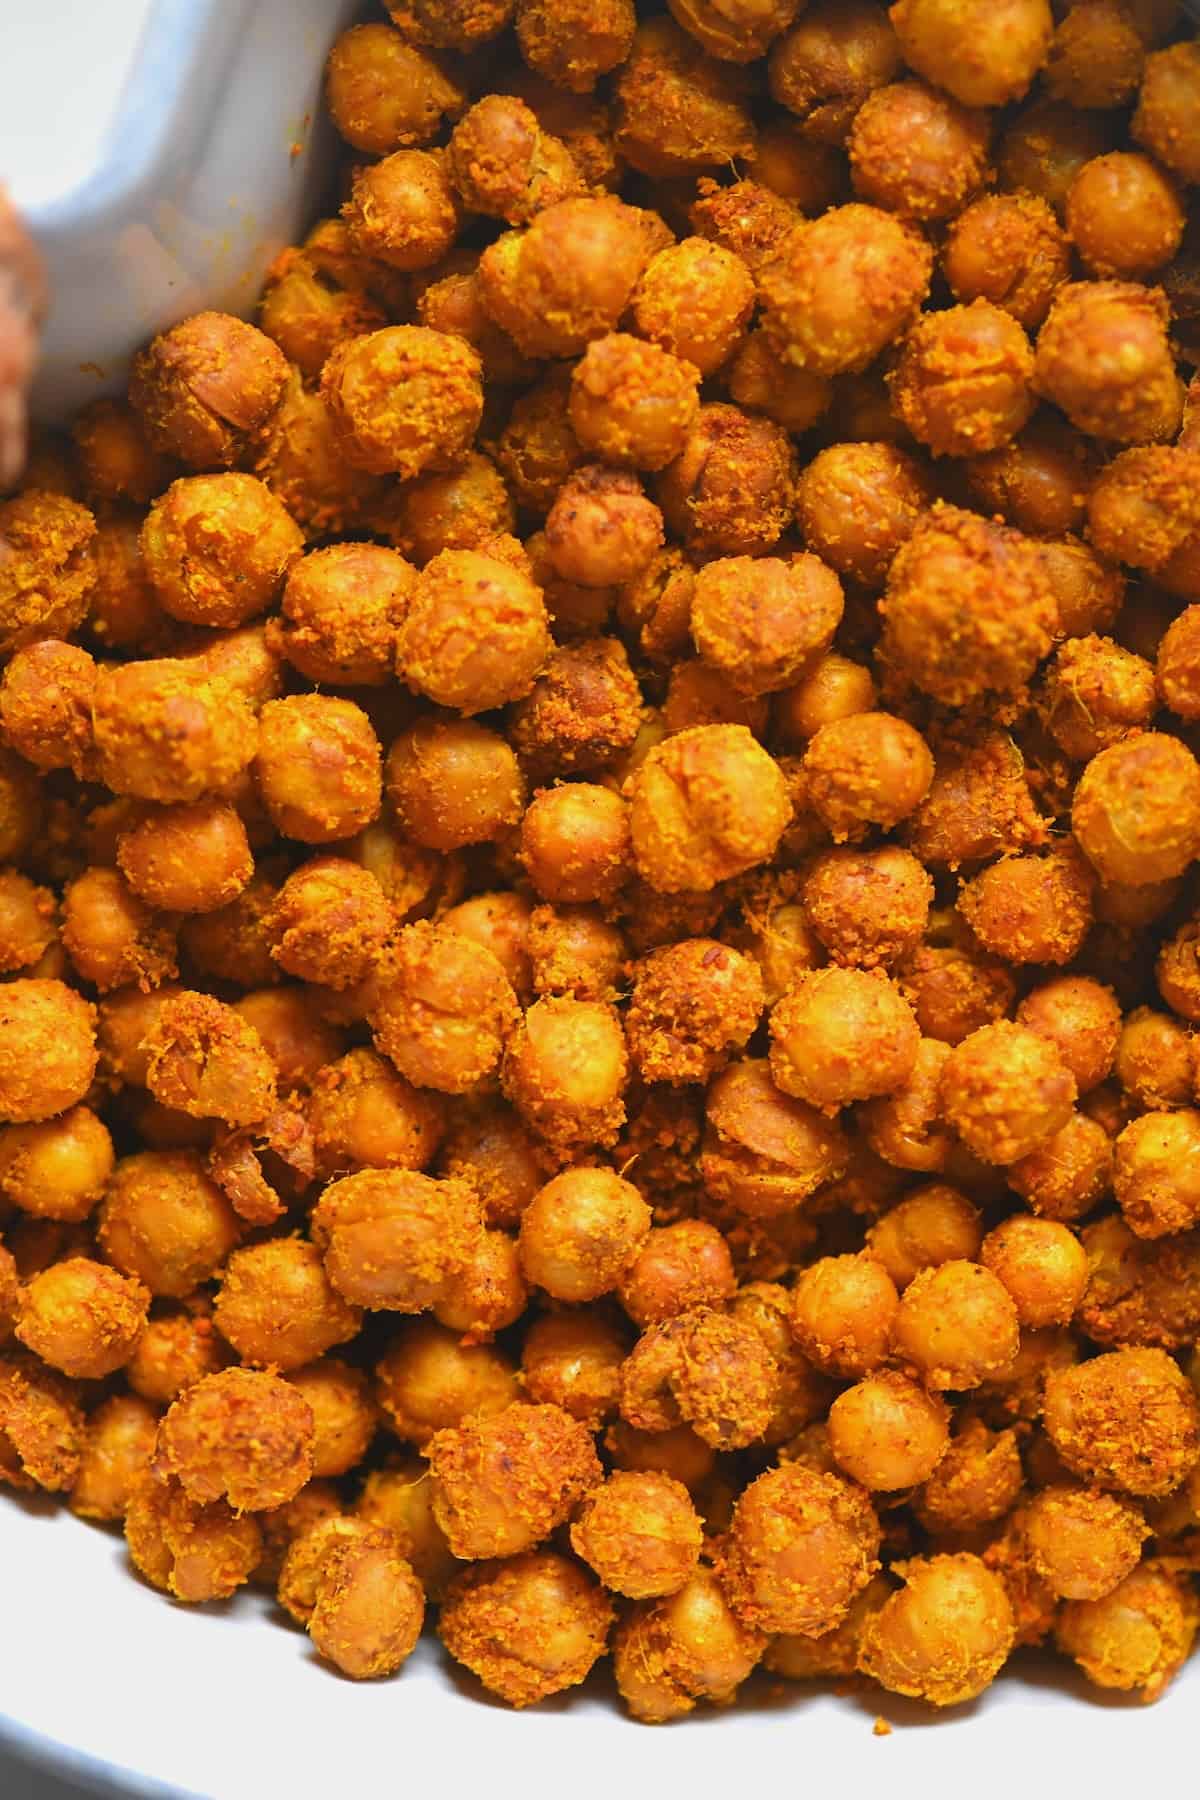 A close up of roasted chickpeas in a bowl